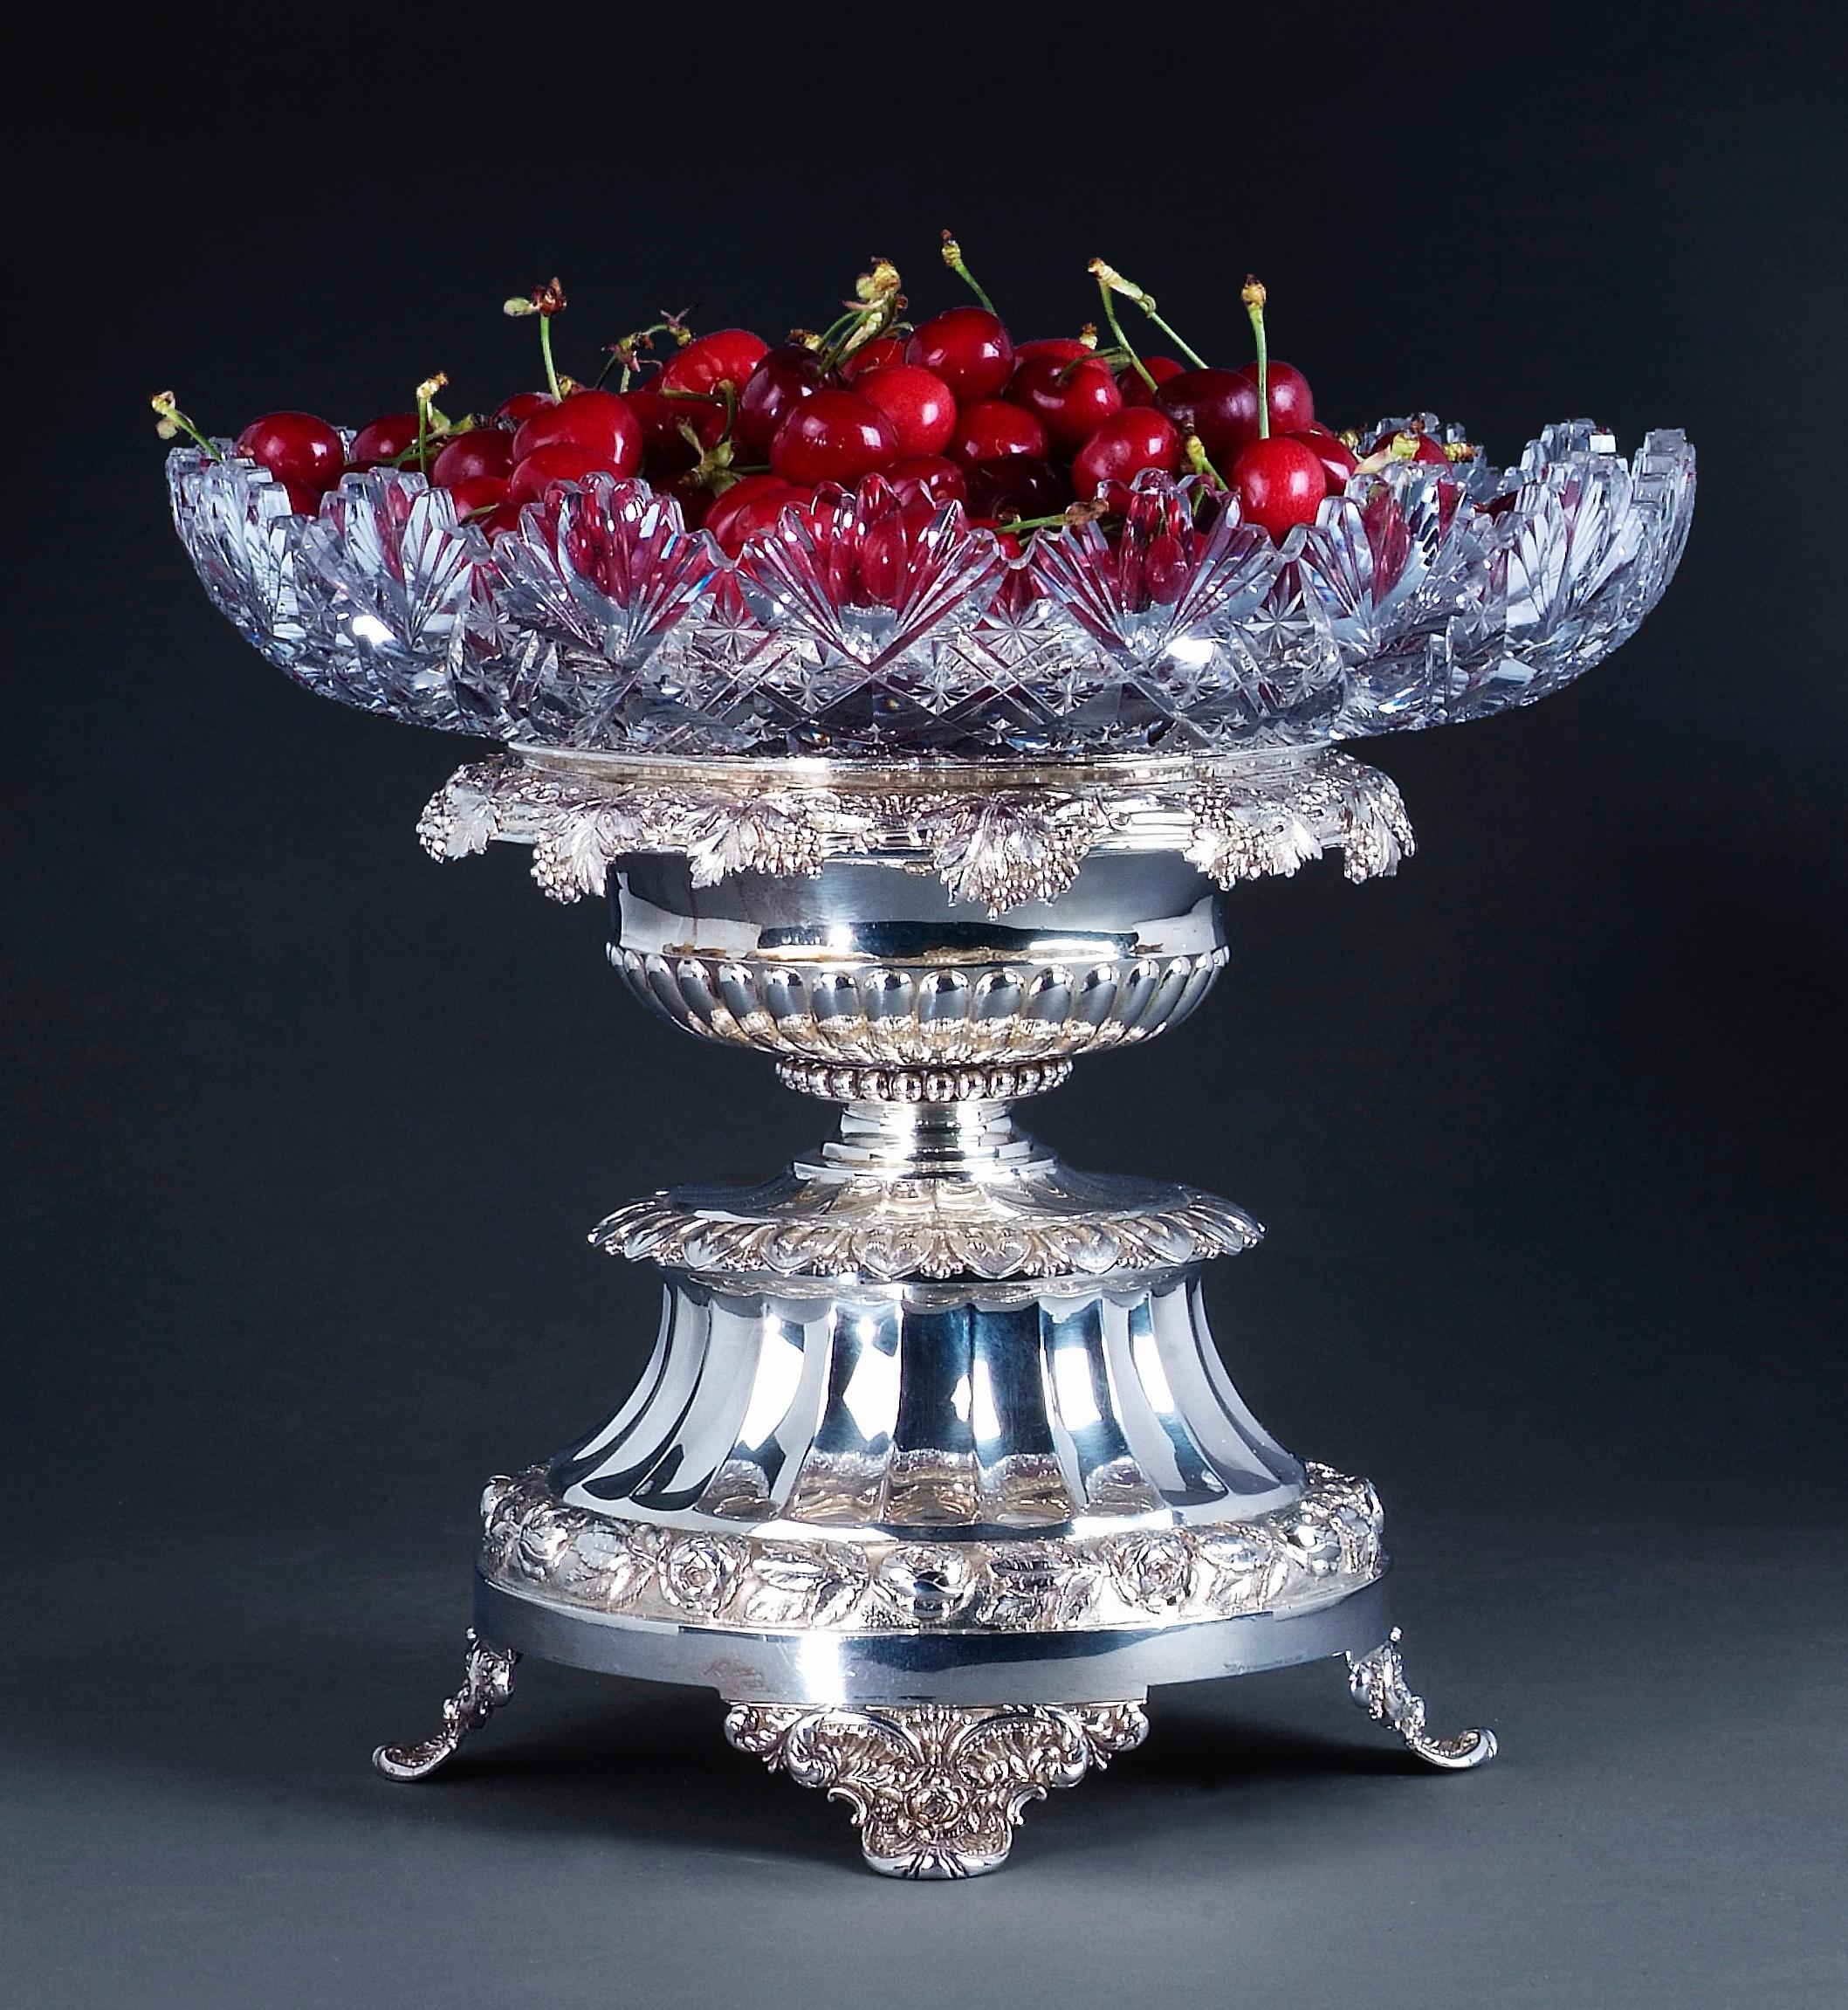 George IV silver centrepiece, with cut glass bowl, engraved with a crest